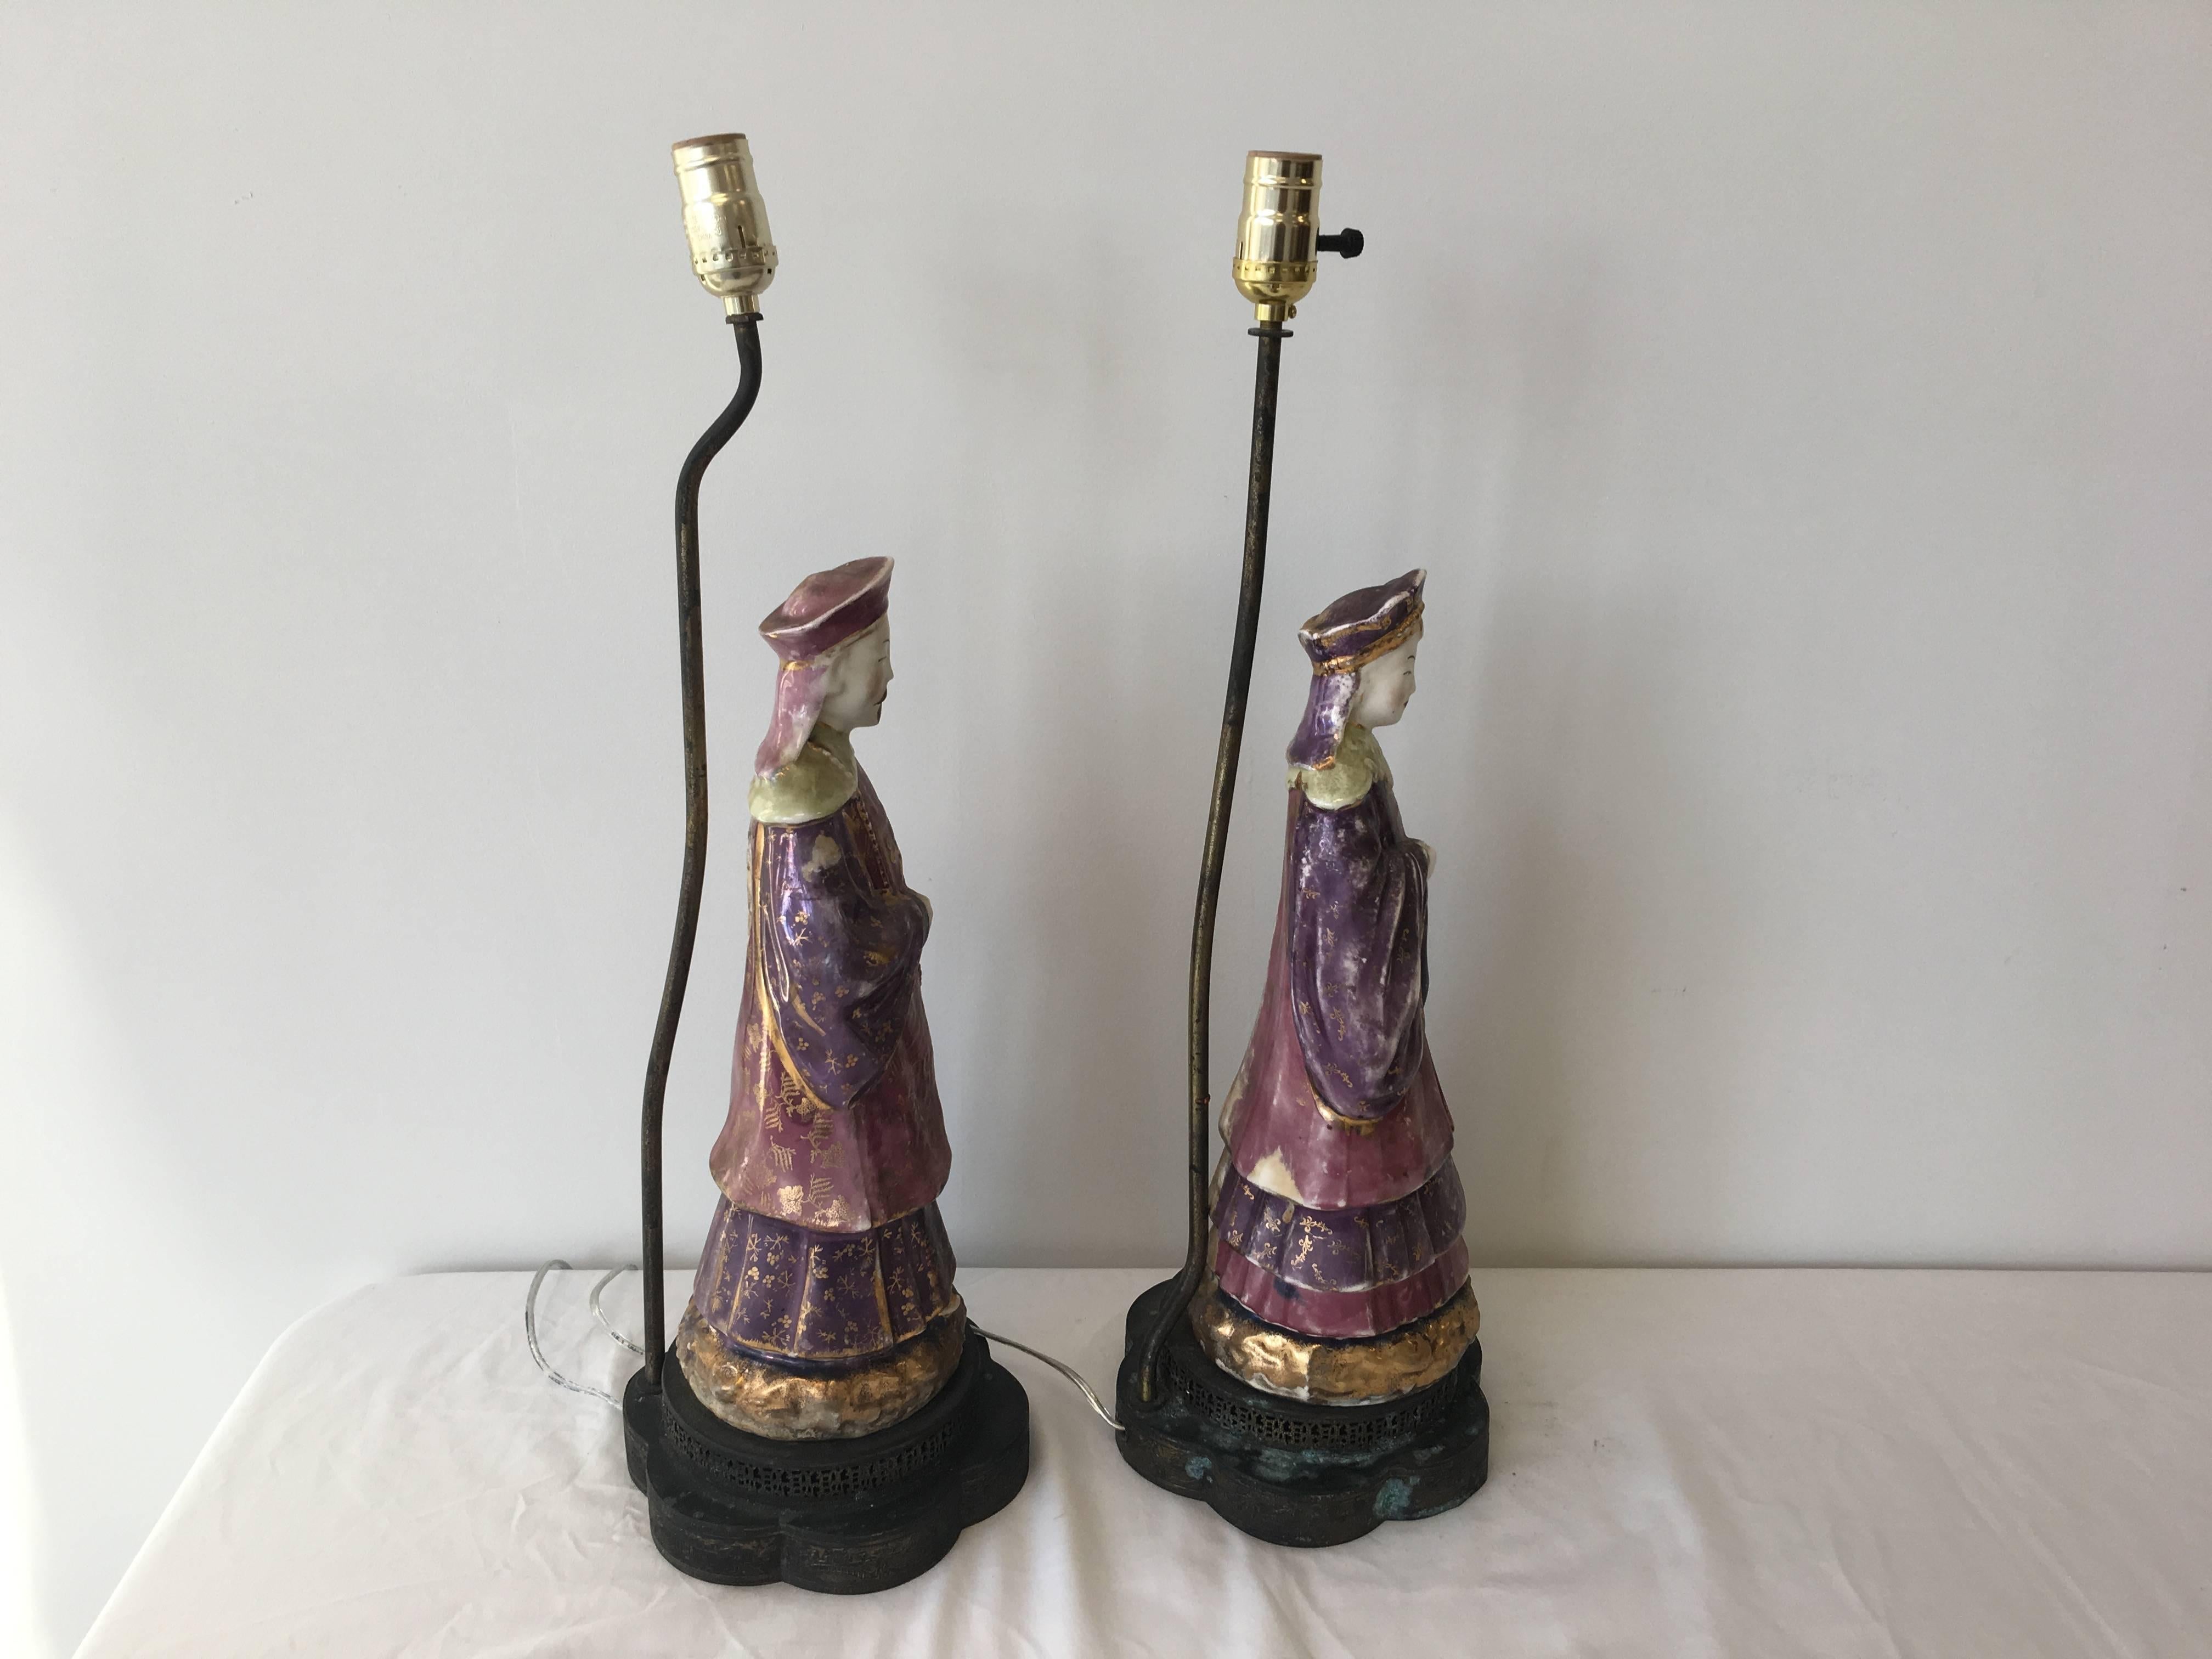 1920s Asian Emperor and Empress Statue Lamps 1